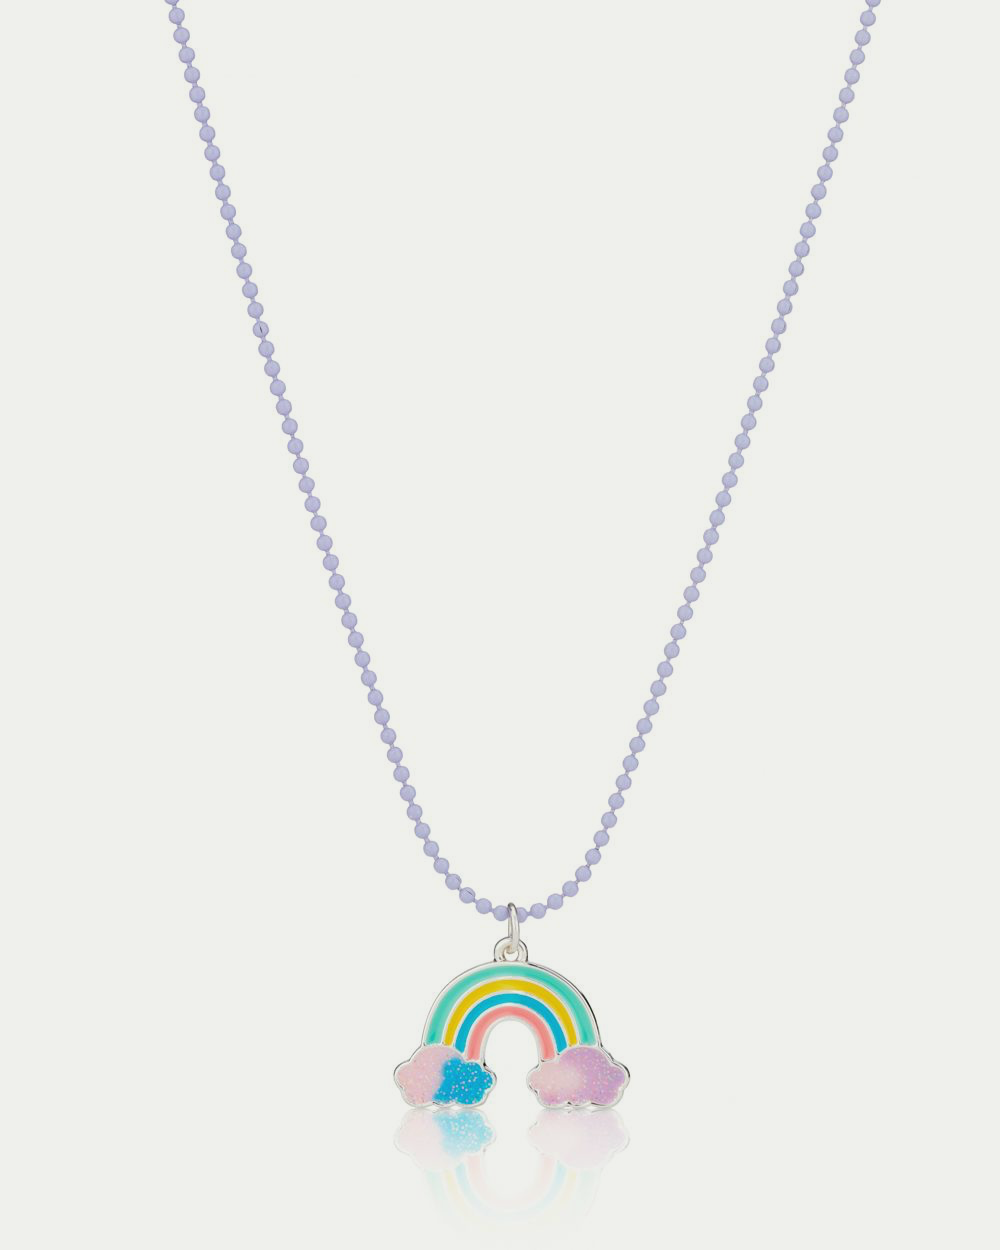 Rainbow Necklace - Small Stuff Accessories